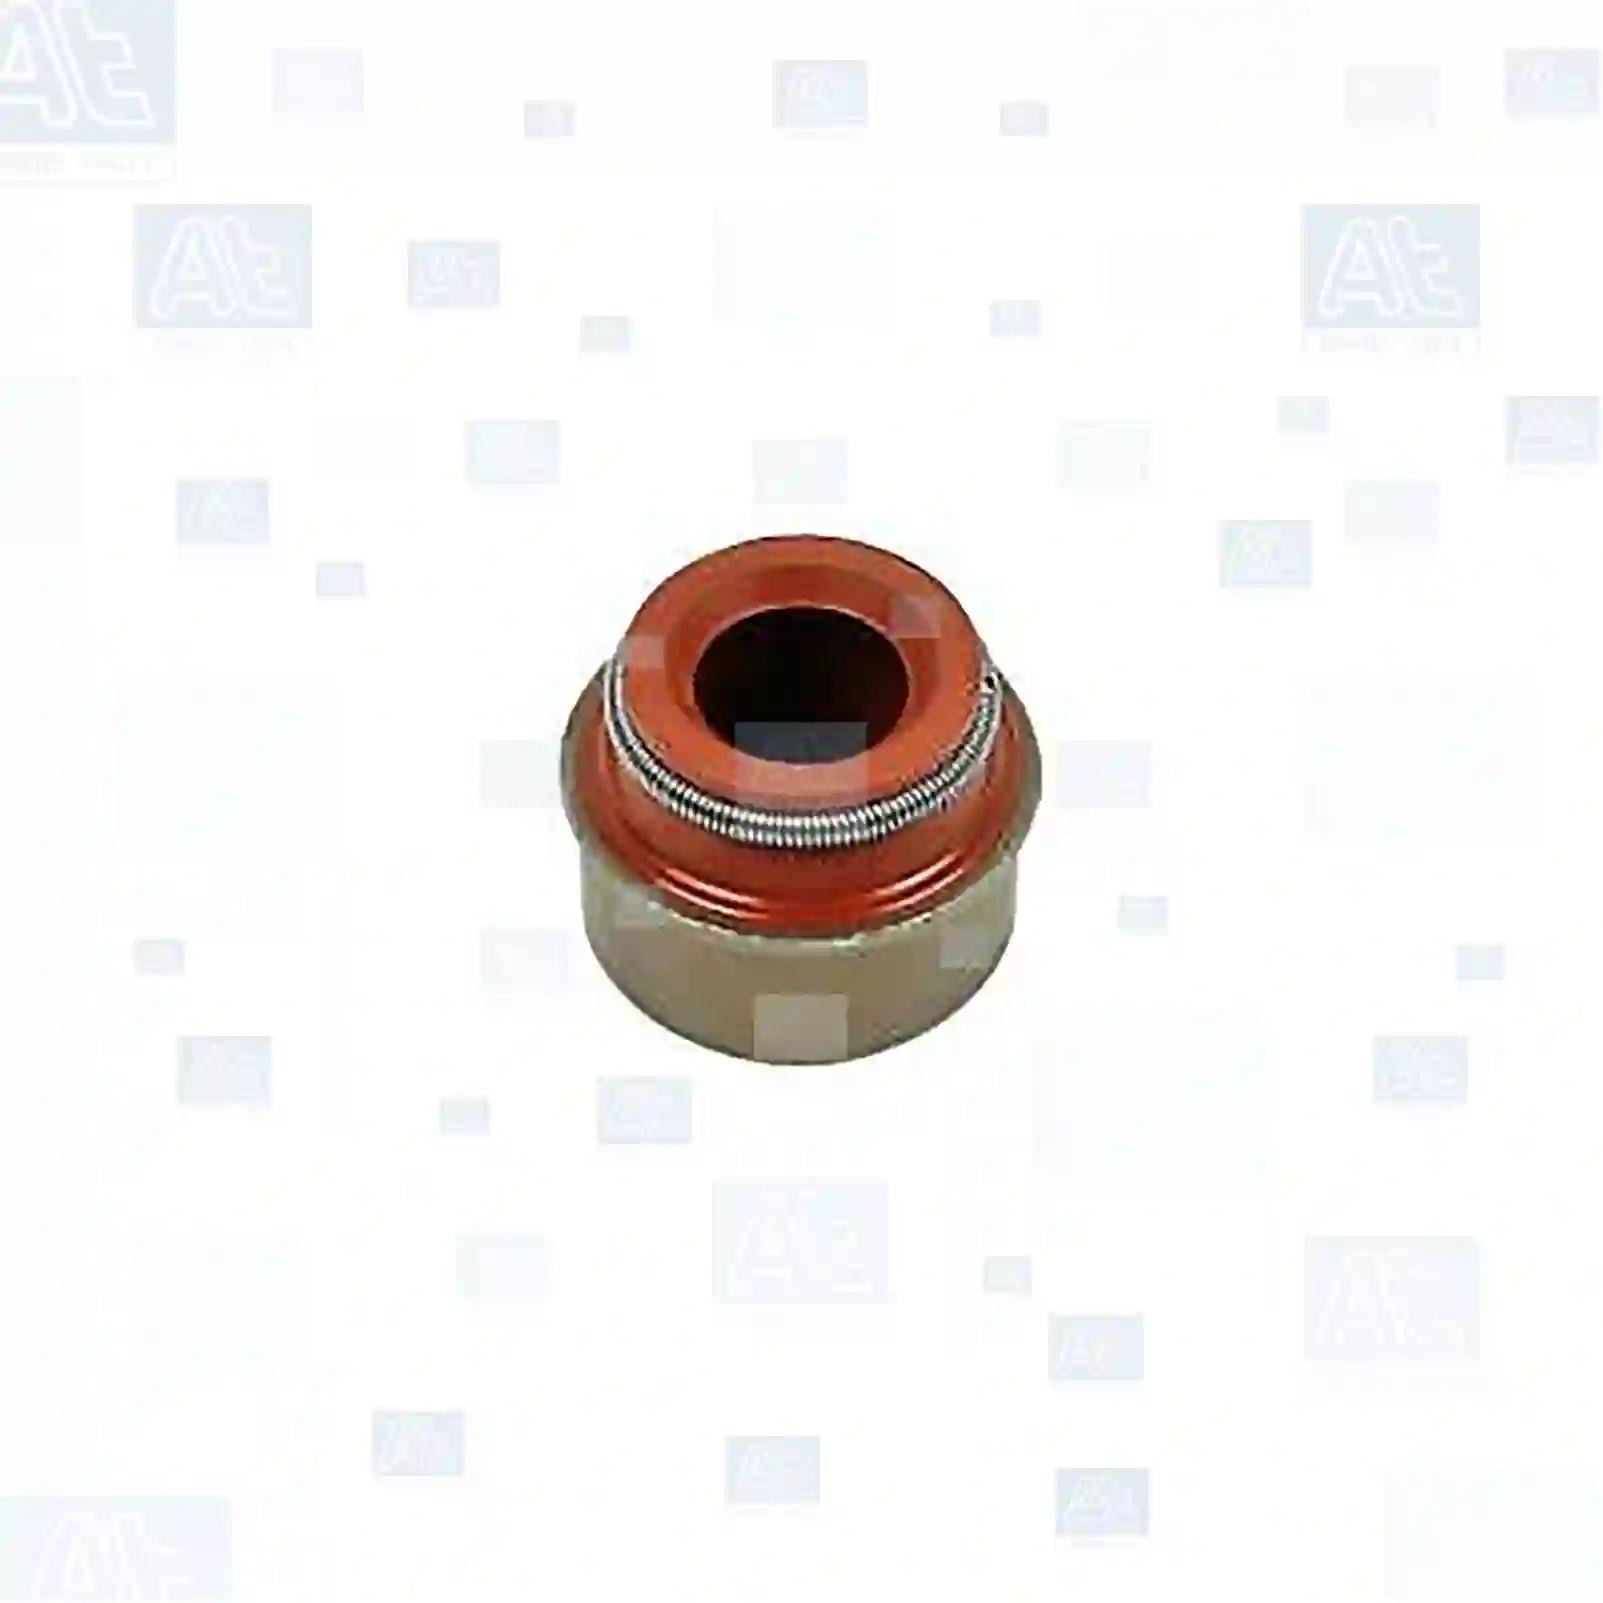 Valve stem seal, at no 77700697, oem no: 04357028, 07500716, 07553616, 07581344, 027109675, 027109675C, 031103351A, 11341305054, 095619, 095624, 095628, 098628, 9602012480, 7700103872, 04265701, 04357028, 07553616, 07581344, 07582158, 07650355, 07706068, 07709714, 46436047, 46440885, 7553616, 7581344, 7706068, 7709714, 1049794, 1639191, V86HF6571BA, 93160891, 04357028, 07553616, 07581344, 0000534858, 13207-6F901, 4412186, 095619, 095624, 095628, 098628, 9602012480, 7700103872, 7700736465, 8200234651, 021012326A, 027109675, 027109675C, 027109675, 027109675C, 1317772, 30638622, 30638662, 30889394, 3517860, 3517893, 027109675, 031103351A At Spare Part | Engine, Accelerator Pedal, Camshaft, Connecting Rod, Crankcase, Crankshaft, Cylinder Head, Engine Suspension Mountings, Exhaust Manifold, Exhaust Gas Recirculation, Filter Kits, Flywheel Housing, General Overhaul Kits, Engine, Intake Manifold, Oil Cleaner, Oil Cooler, Oil Filter, Oil Pump, Oil Sump, Piston & Liner, Sensor & Switch, Timing Case, Turbocharger, Cooling System, Belt Tensioner, Coolant Filter, Coolant Pipe, Corrosion Prevention Agent, Drive, Expansion Tank, Fan, Intercooler, Monitors & Gauges, Radiator, Thermostat, V-Belt / Timing belt, Water Pump, Fuel System, Electronical Injector Unit, Feed Pump, Fuel Filter, cpl., Fuel Gauge Sender,  Fuel Line, Fuel Pump, Fuel Tank, Injection Line Kit, Injection Pump, Exhaust System, Clutch & Pedal, Gearbox, Propeller Shaft, Axles, Brake System, Hubs & Wheels, Suspension, Leaf Spring, Universal Parts / Accessories, Steering, Electrical System, Cabin Valve stem seal, at no 77700697, oem no: 04357028, 07500716, 07553616, 07581344, 027109675, 027109675C, 031103351A, 11341305054, 095619, 095624, 095628, 098628, 9602012480, 7700103872, 04265701, 04357028, 07553616, 07581344, 07582158, 07650355, 07706068, 07709714, 46436047, 46440885, 7553616, 7581344, 7706068, 7709714, 1049794, 1639191, V86HF6571BA, 93160891, 04357028, 07553616, 07581344, 0000534858, 13207-6F901, 4412186, 095619, 095624, 095628, 098628, 9602012480, 7700103872, 7700736465, 8200234651, 021012326A, 027109675, 027109675C, 027109675, 027109675C, 1317772, 30638622, 30638662, 30889394, 3517860, 3517893, 027109675, 031103351A At Spare Part | Engine, Accelerator Pedal, Camshaft, Connecting Rod, Crankcase, Crankshaft, Cylinder Head, Engine Suspension Mountings, Exhaust Manifold, Exhaust Gas Recirculation, Filter Kits, Flywheel Housing, General Overhaul Kits, Engine, Intake Manifold, Oil Cleaner, Oil Cooler, Oil Filter, Oil Pump, Oil Sump, Piston & Liner, Sensor & Switch, Timing Case, Turbocharger, Cooling System, Belt Tensioner, Coolant Filter, Coolant Pipe, Corrosion Prevention Agent, Drive, Expansion Tank, Fan, Intercooler, Monitors & Gauges, Radiator, Thermostat, V-Belt / Timing belt, Water Pump, Fuel System, Electronical Injector Unit, Feed Pump, Fuel Filter, cpl., Fuel Gauge Sender,  Fuel Line, Fuel Pump, Fuel Tank, Injection Line Kit, Injection Pump, Exhaust System, Clutch & Pedal, Gearbox, Propeller Shaft, Axles, Brake System, Hubs & Wheels, Suspension, Leaf Spring, Universal Parts / Accessories, Steering, Electrical System, Cabin